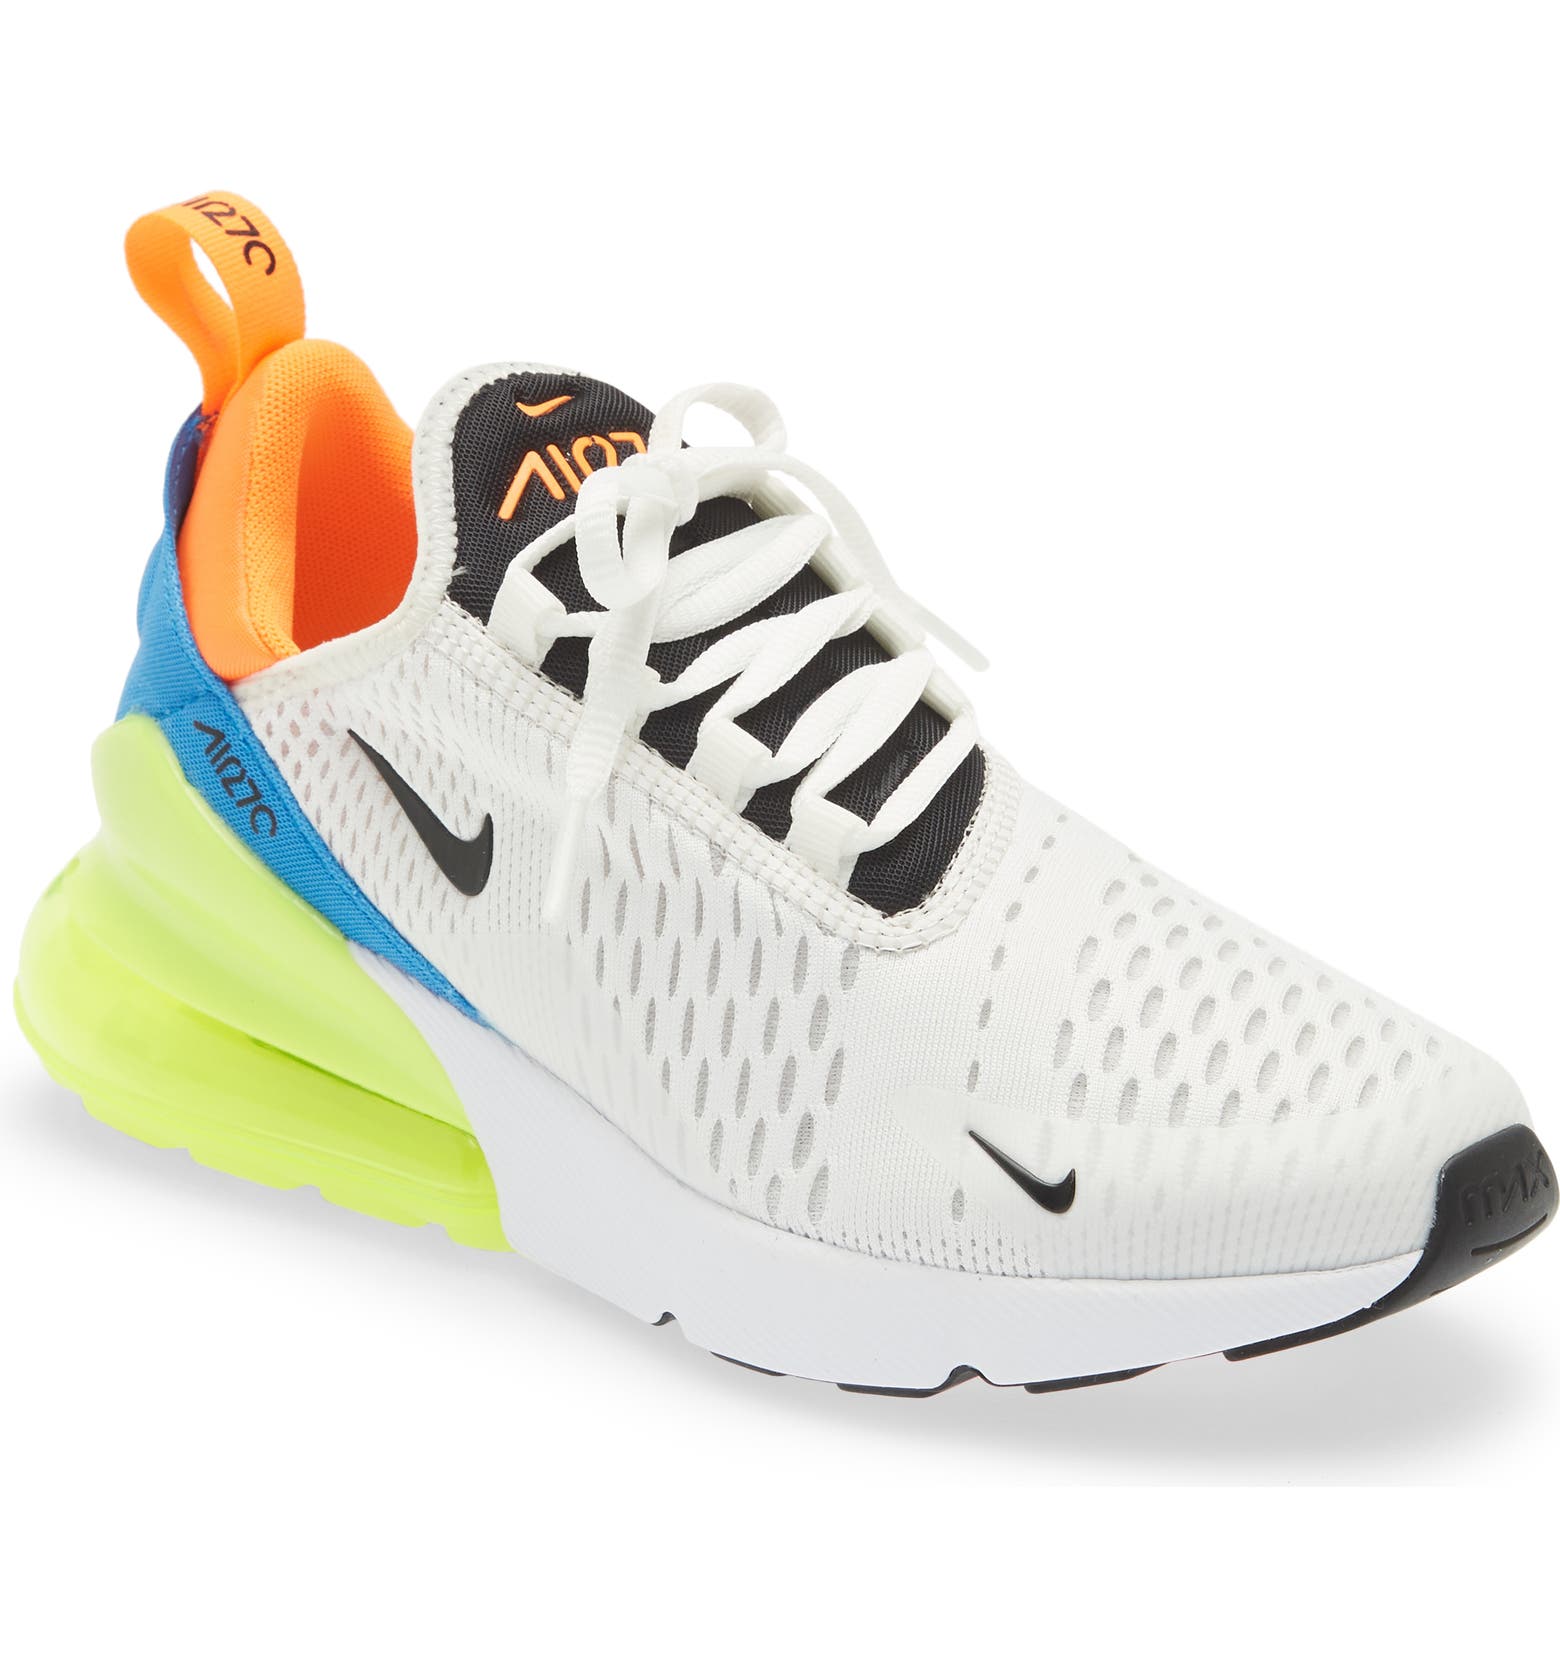 nordstrom.com | Air Max 270 Extreme Sneaker